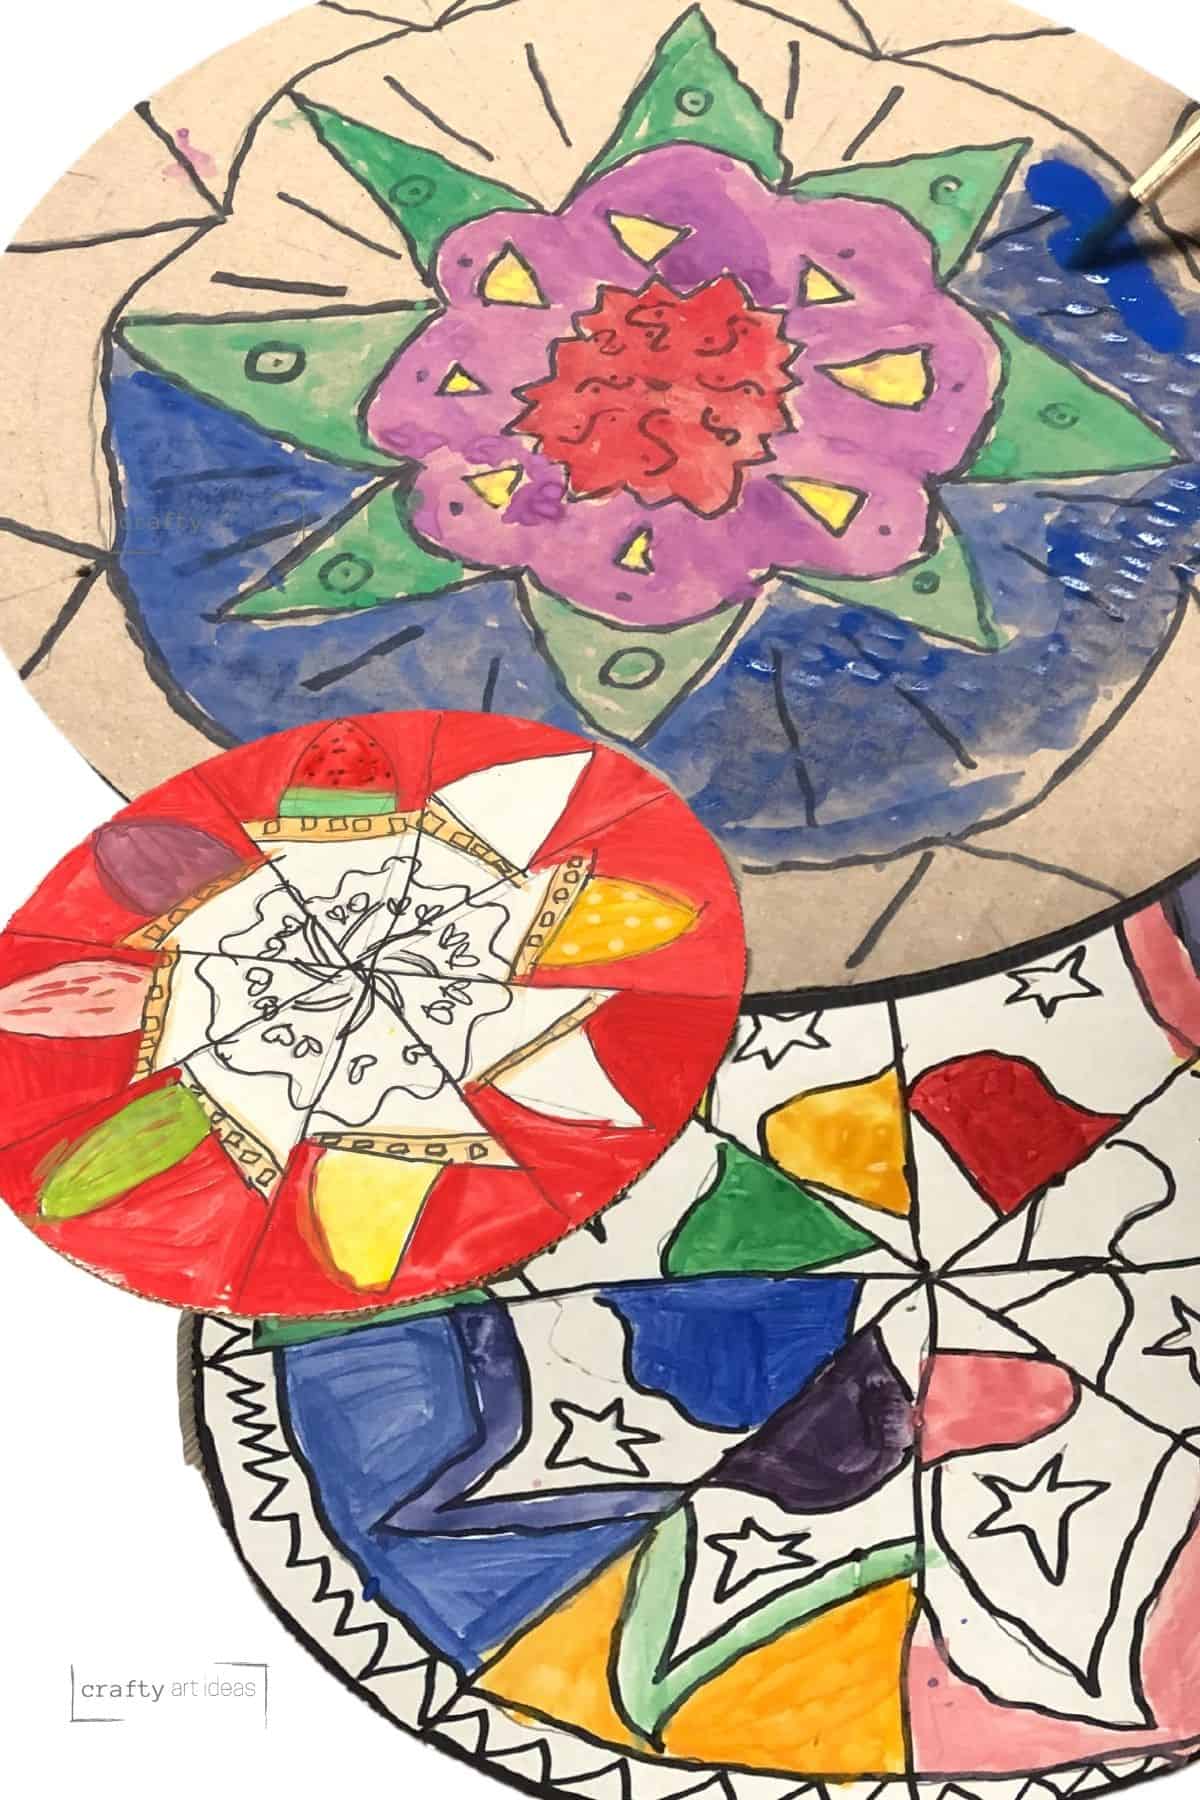 3 different mandala art projects by kids on cardboard circles.